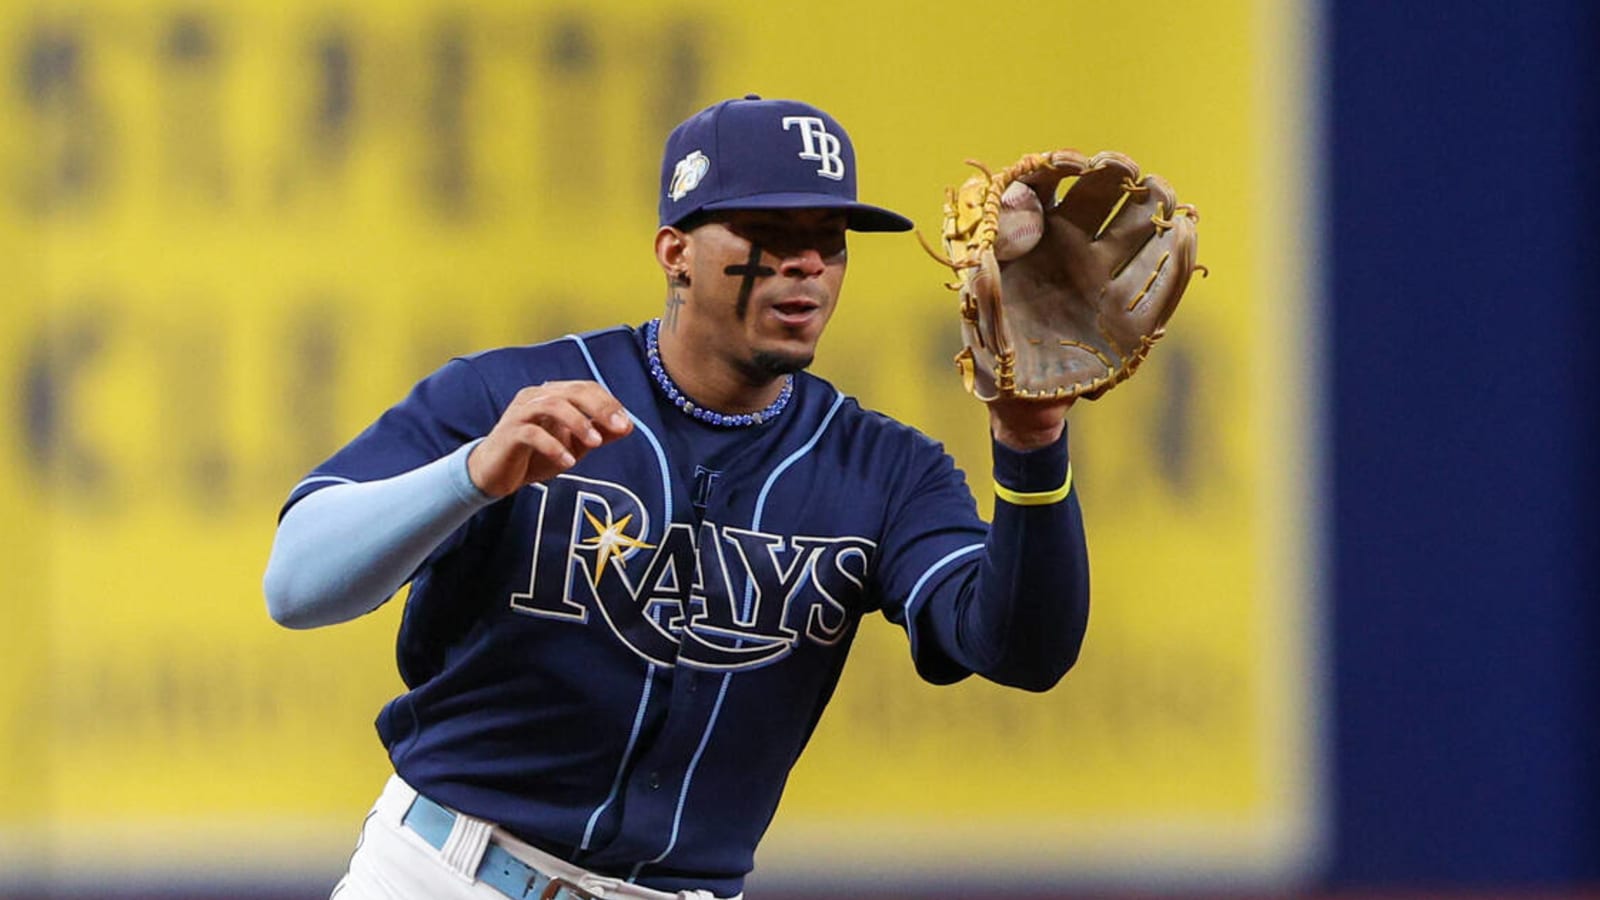 One Tampa Bay Rays star facing serious allegations after viral social media post